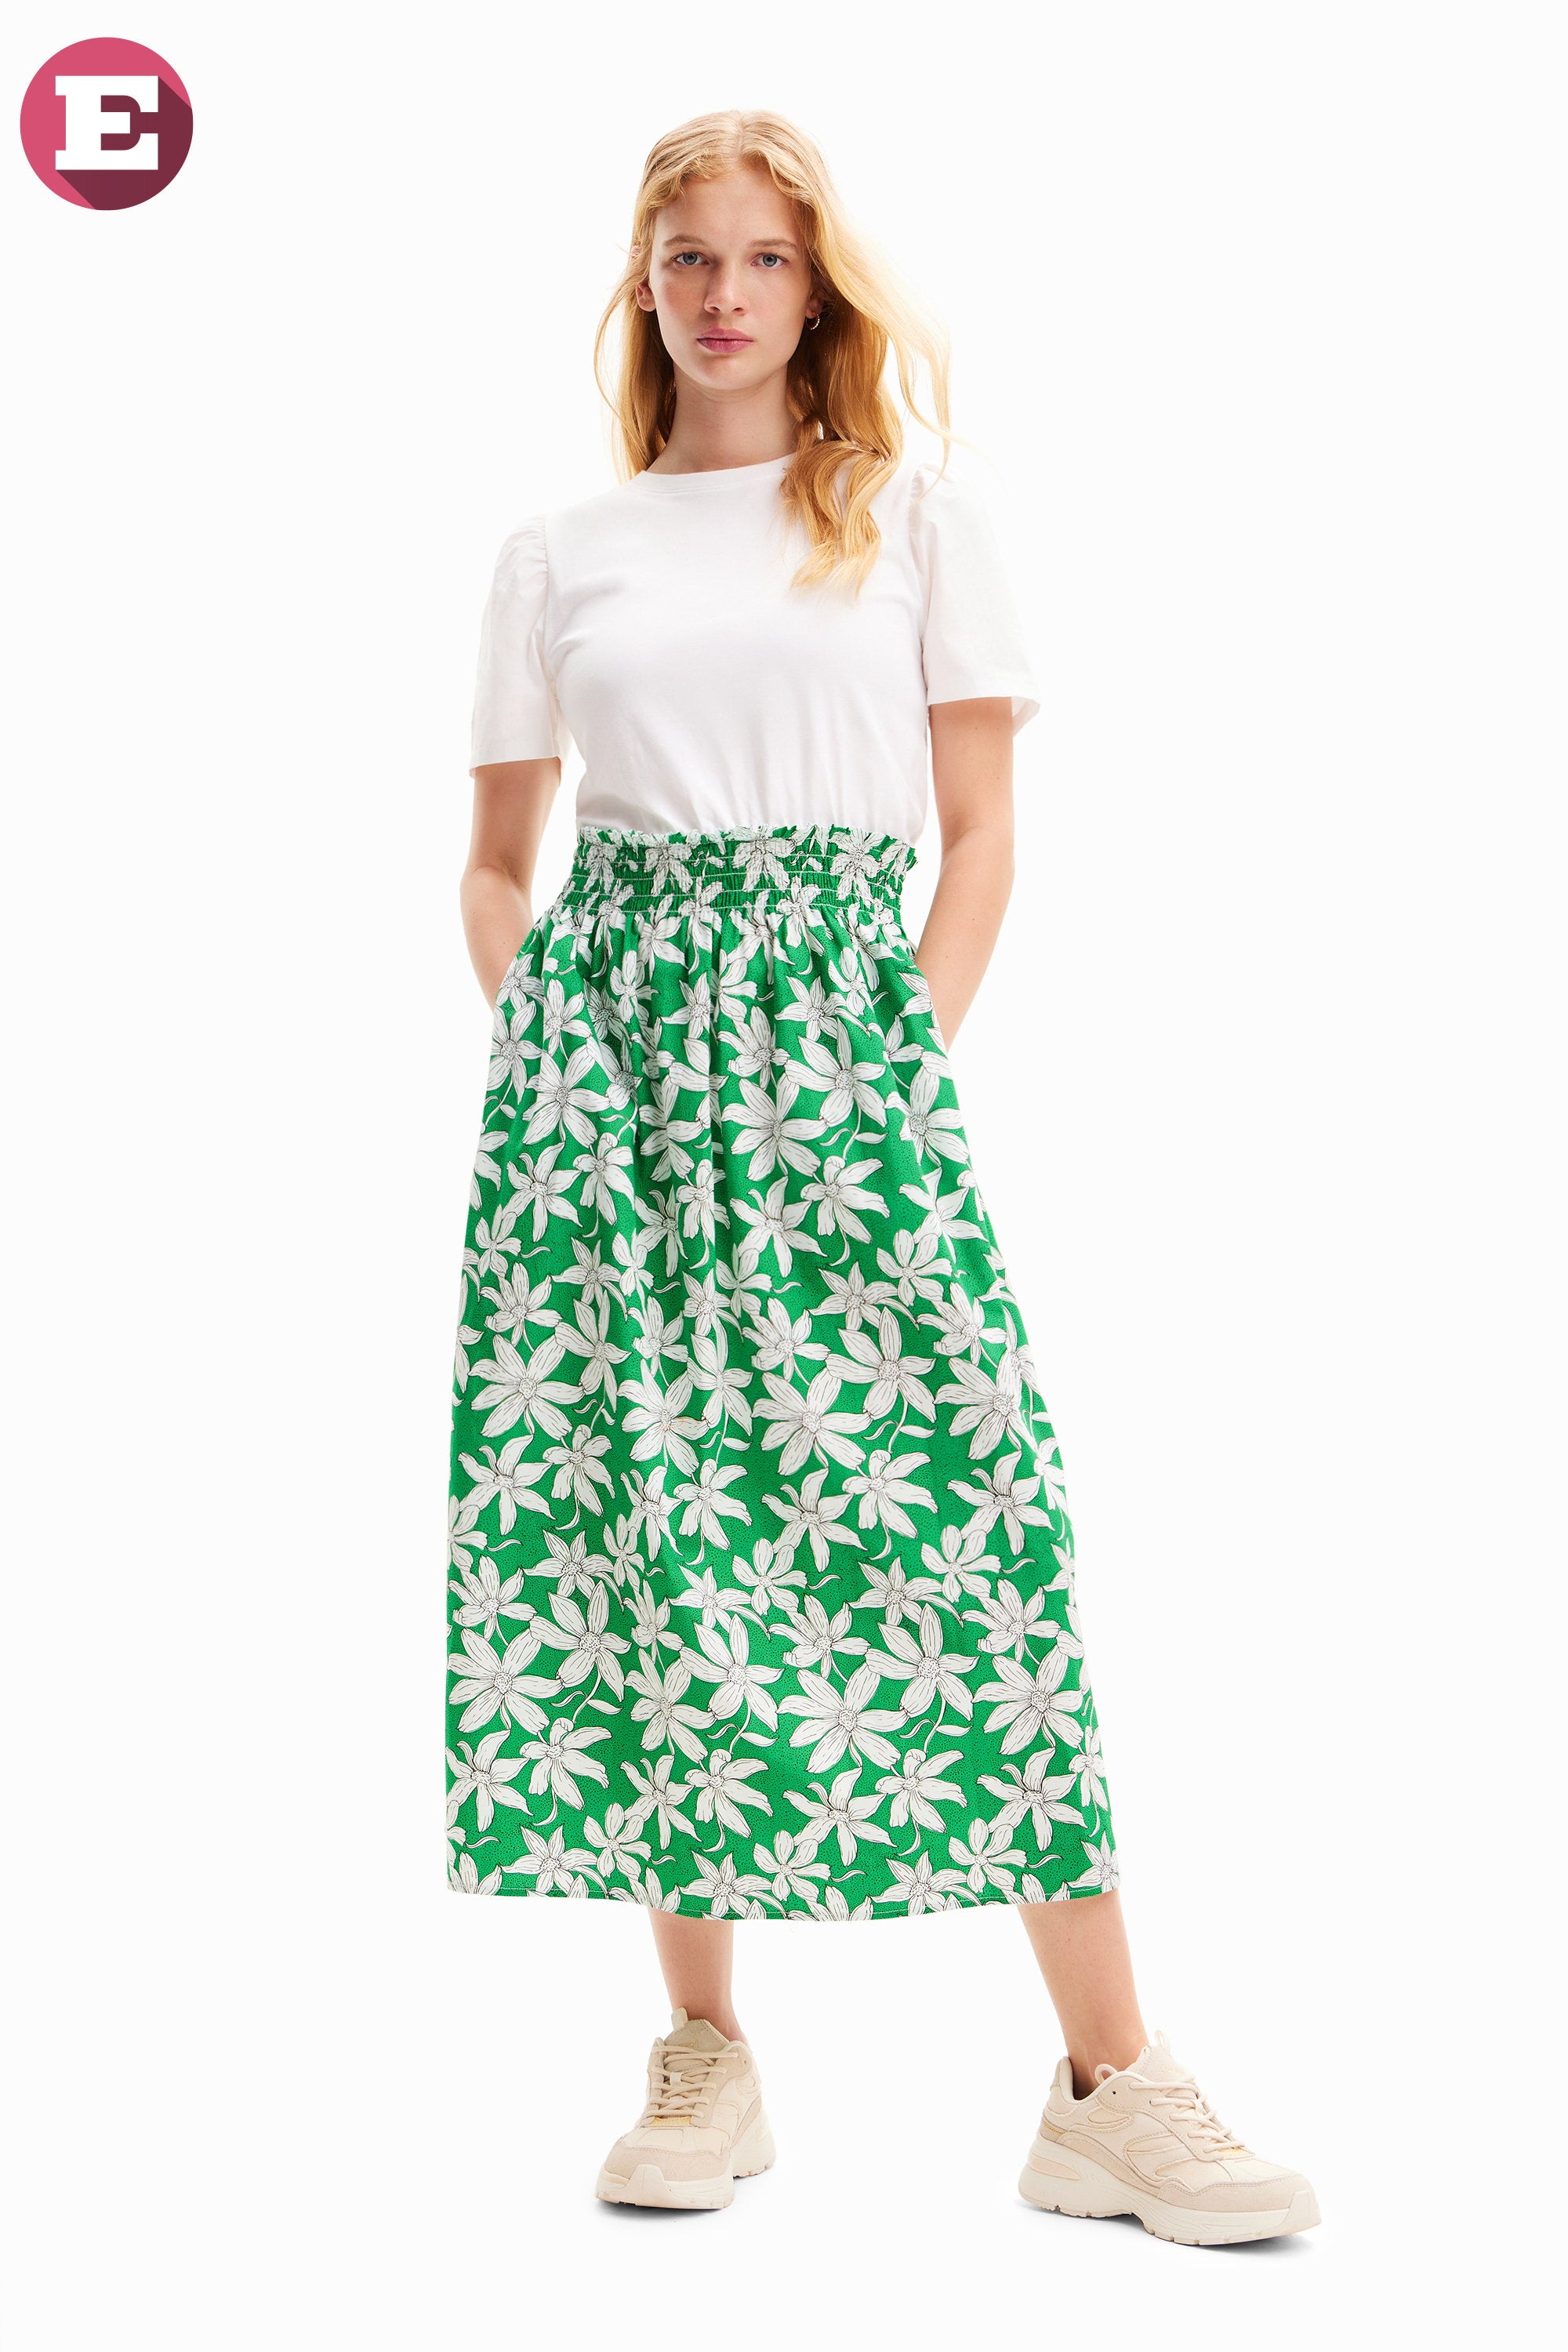 Floral Print Dress in White/Green